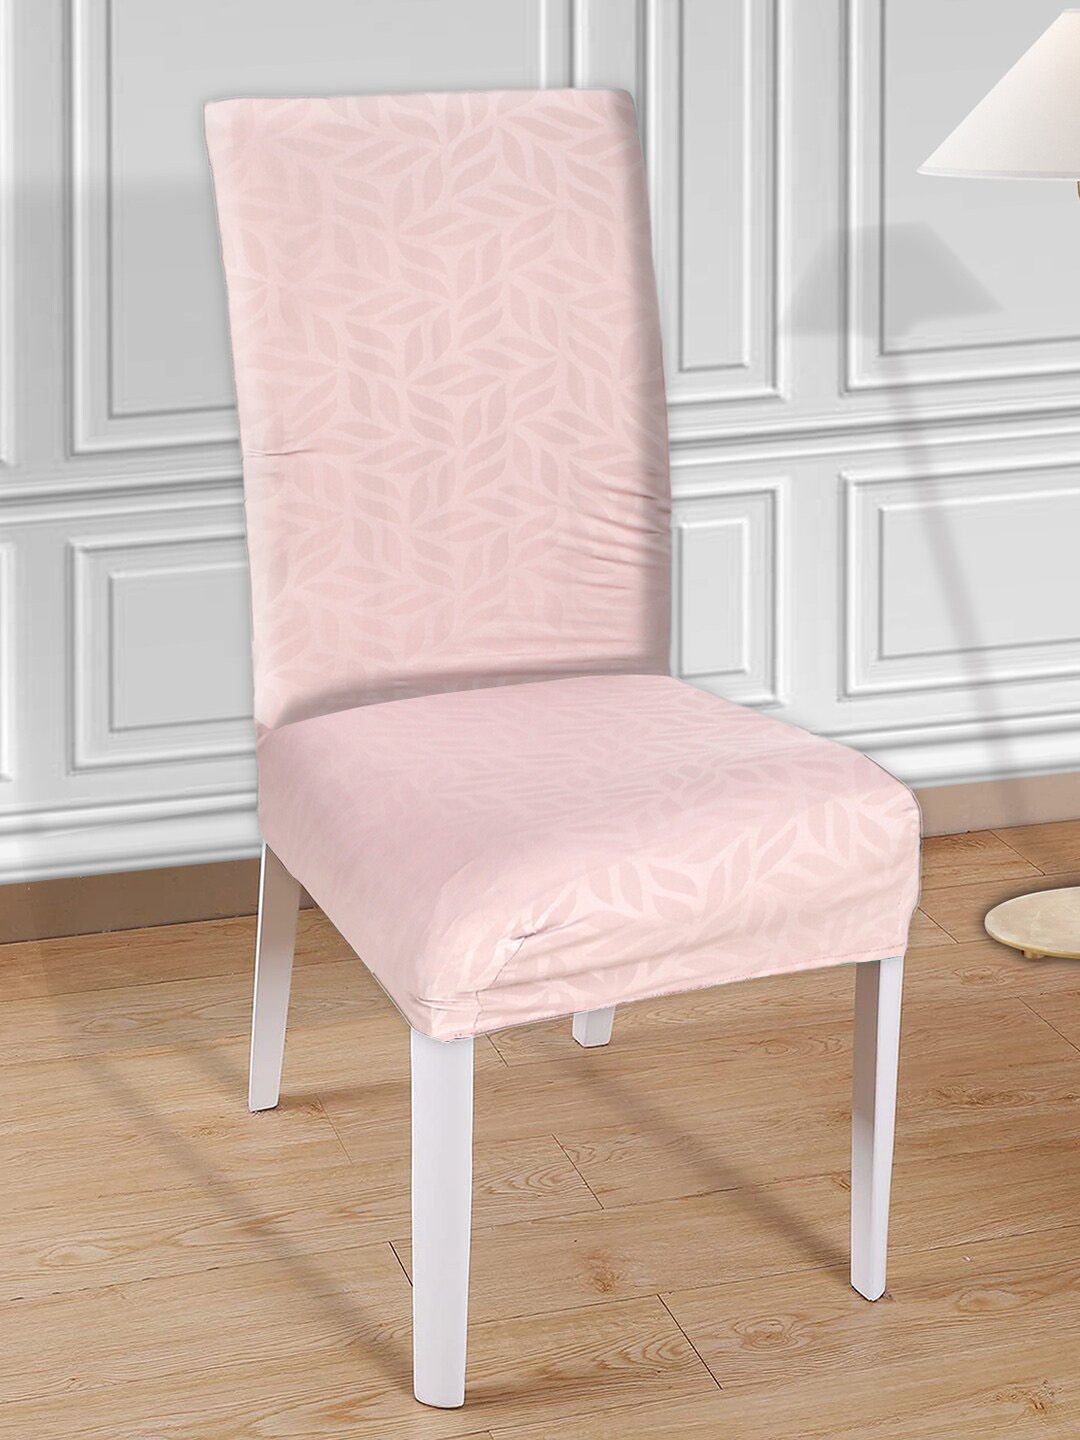 Kuber Industries Pink Leaf Printed Elastic Stretchable Chair Cover Price in India